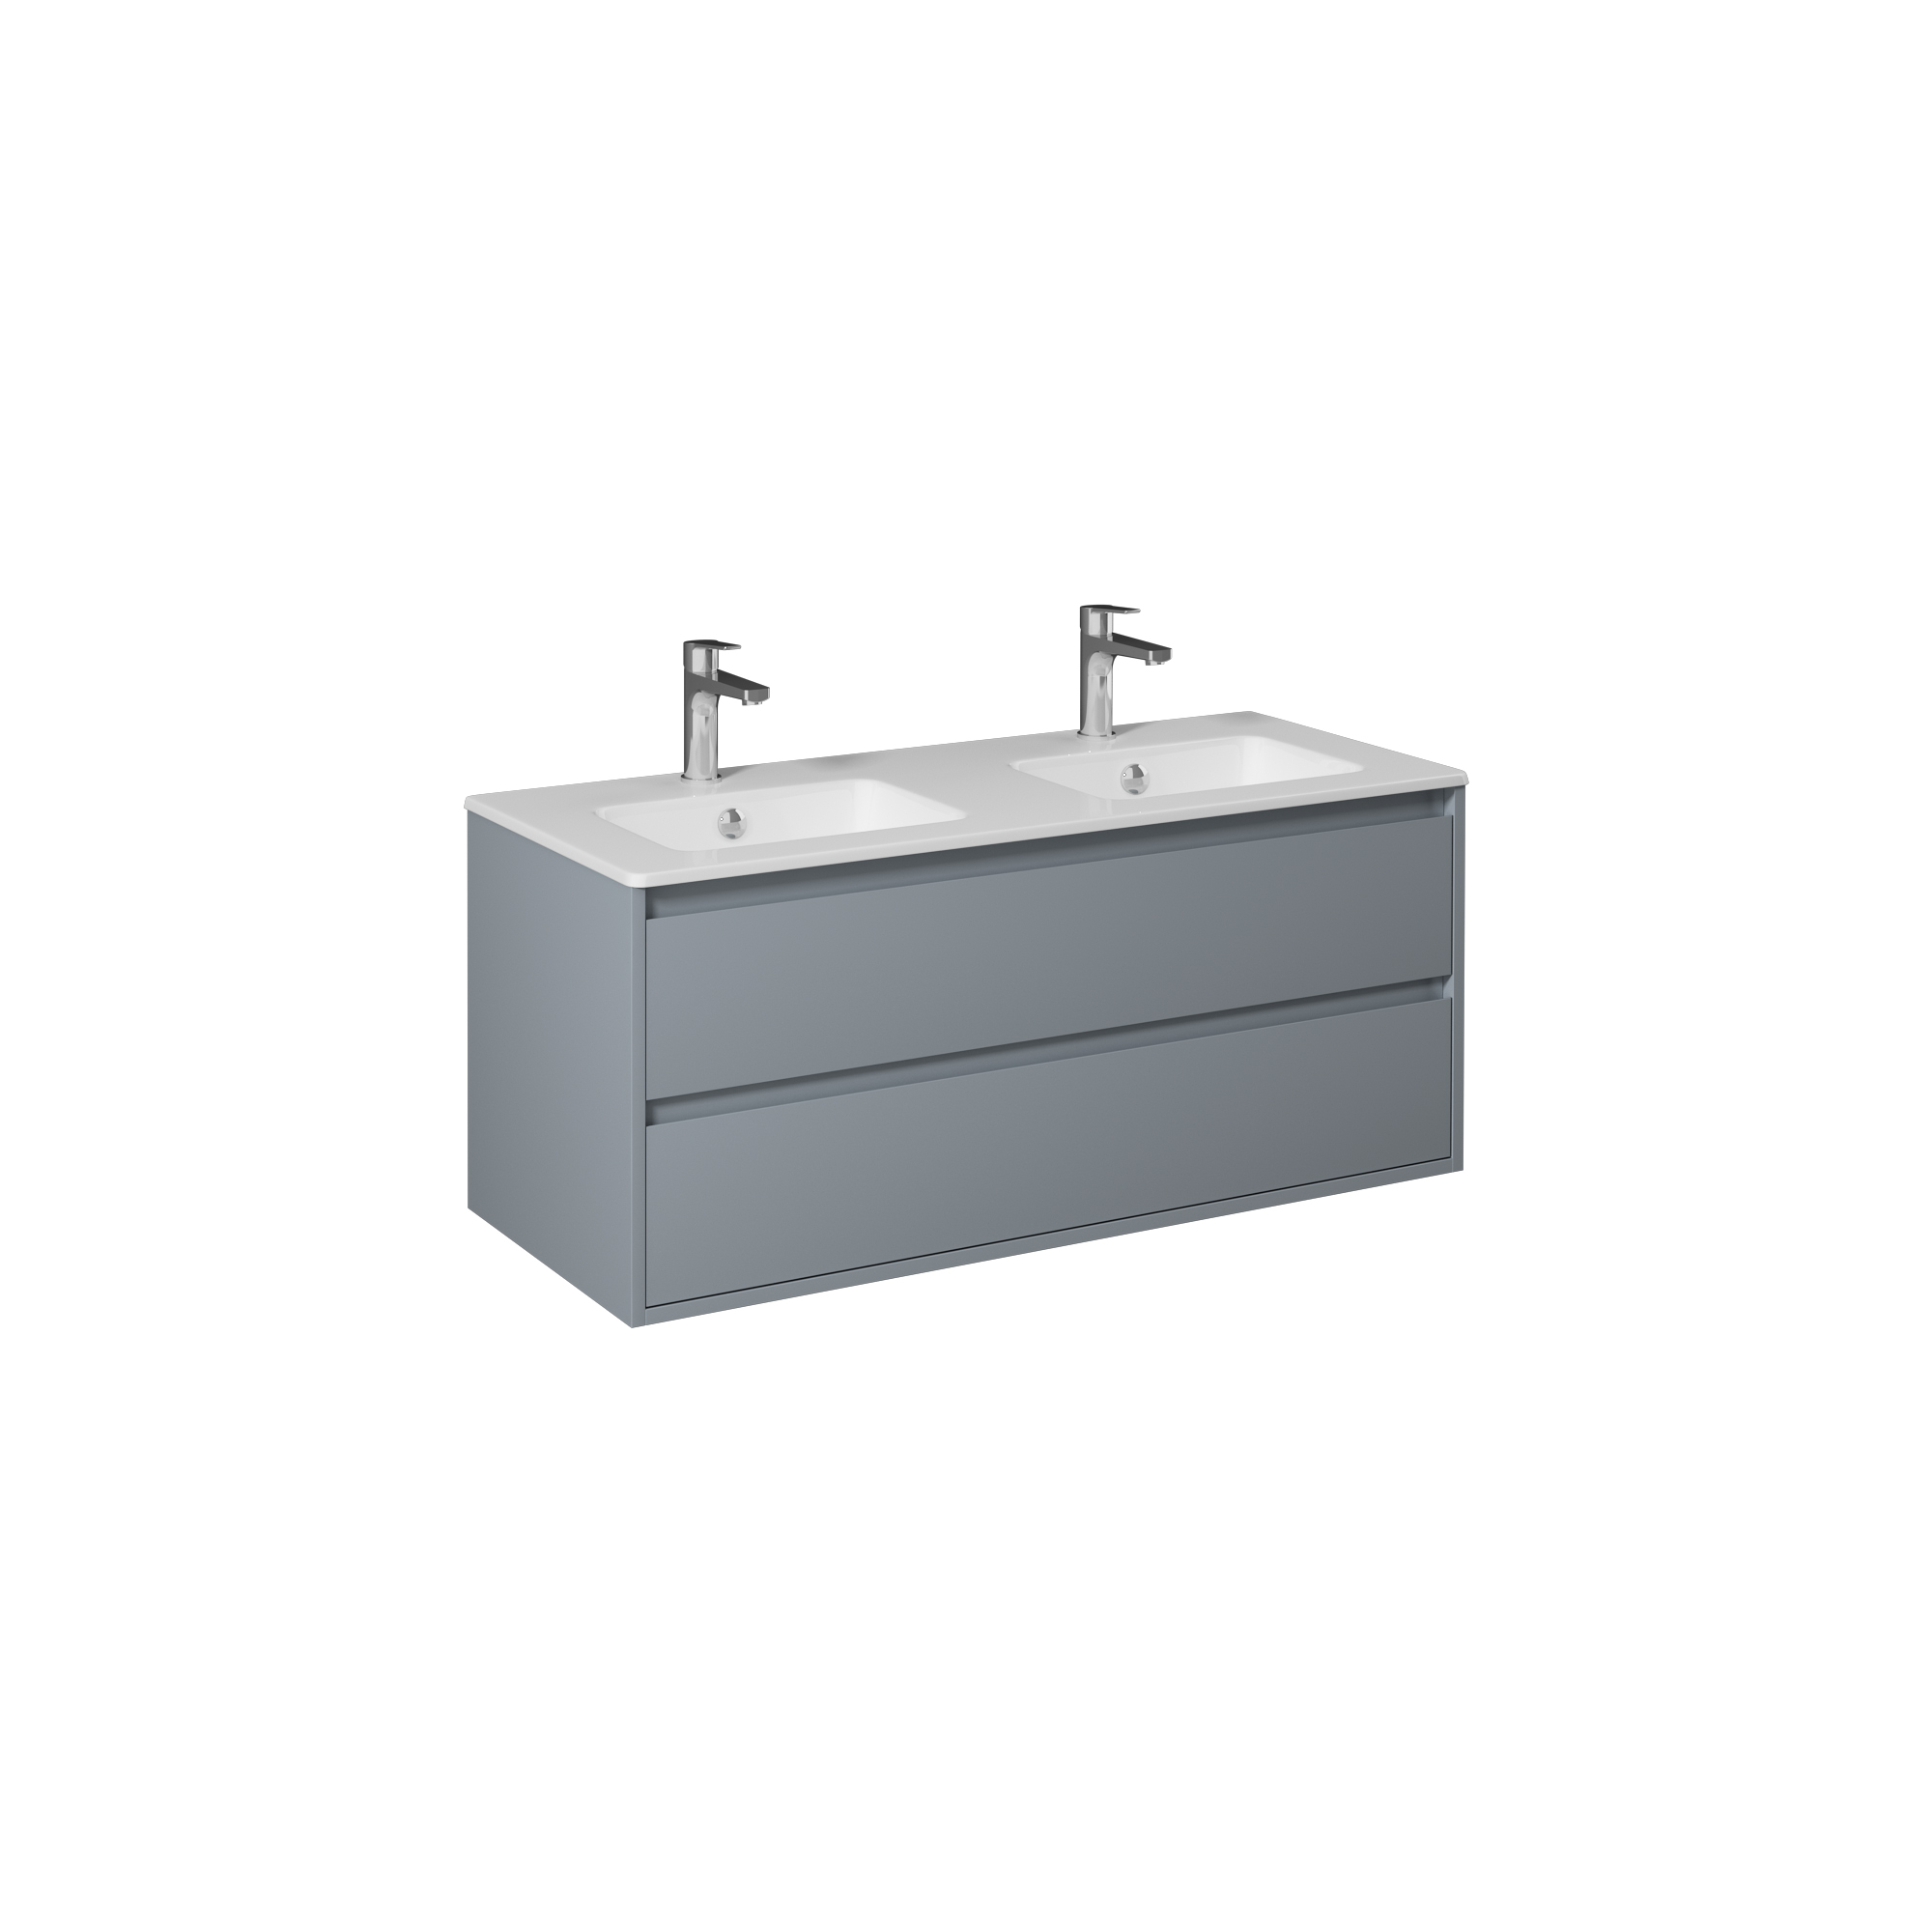 Pro Washbasin Cabinet, Light Grey Lacquer Double Drawer 47"